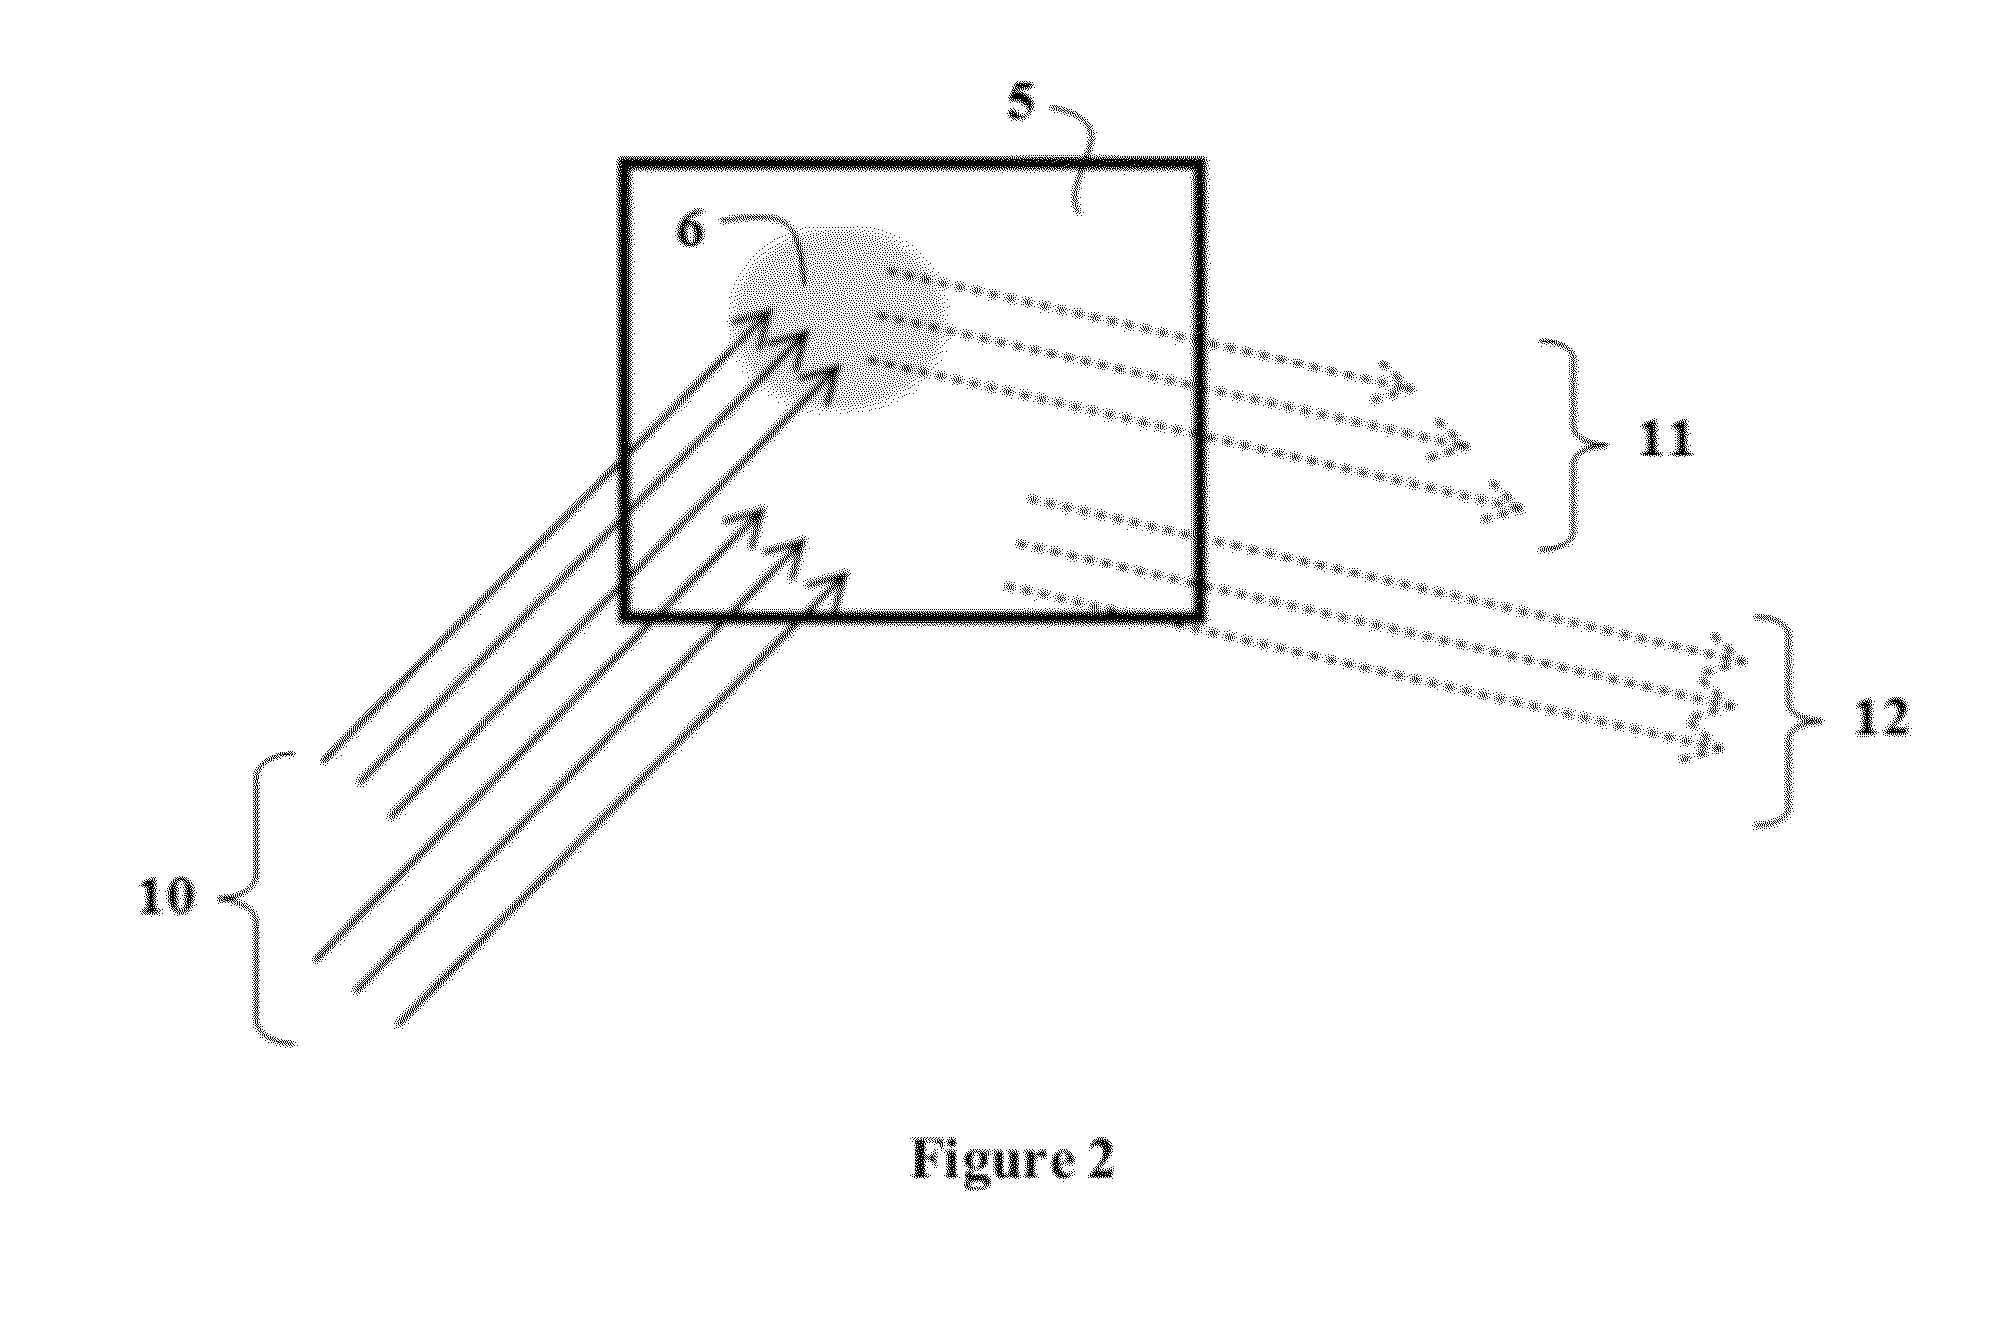 Method for Identifying Materials Using Dielectric Properties through Active Millimeter Wave Illumination